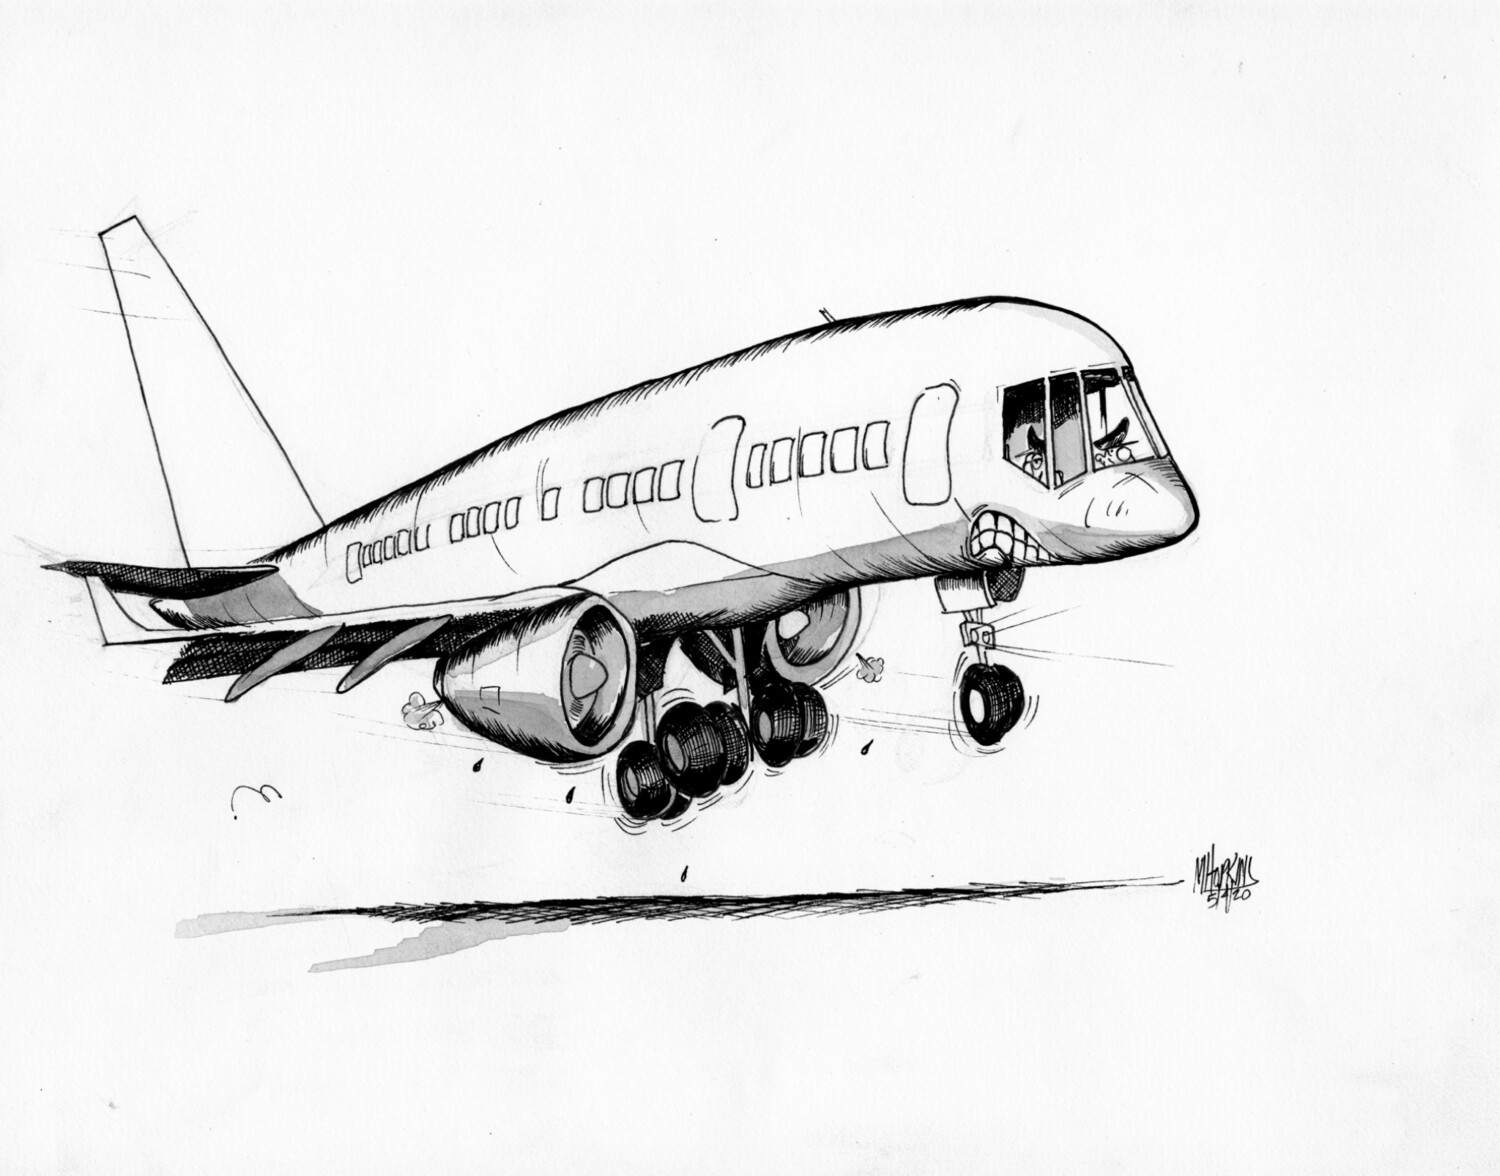 Boeing 757 - Limited Edition Giclée Prints from $50.00 to $200.00